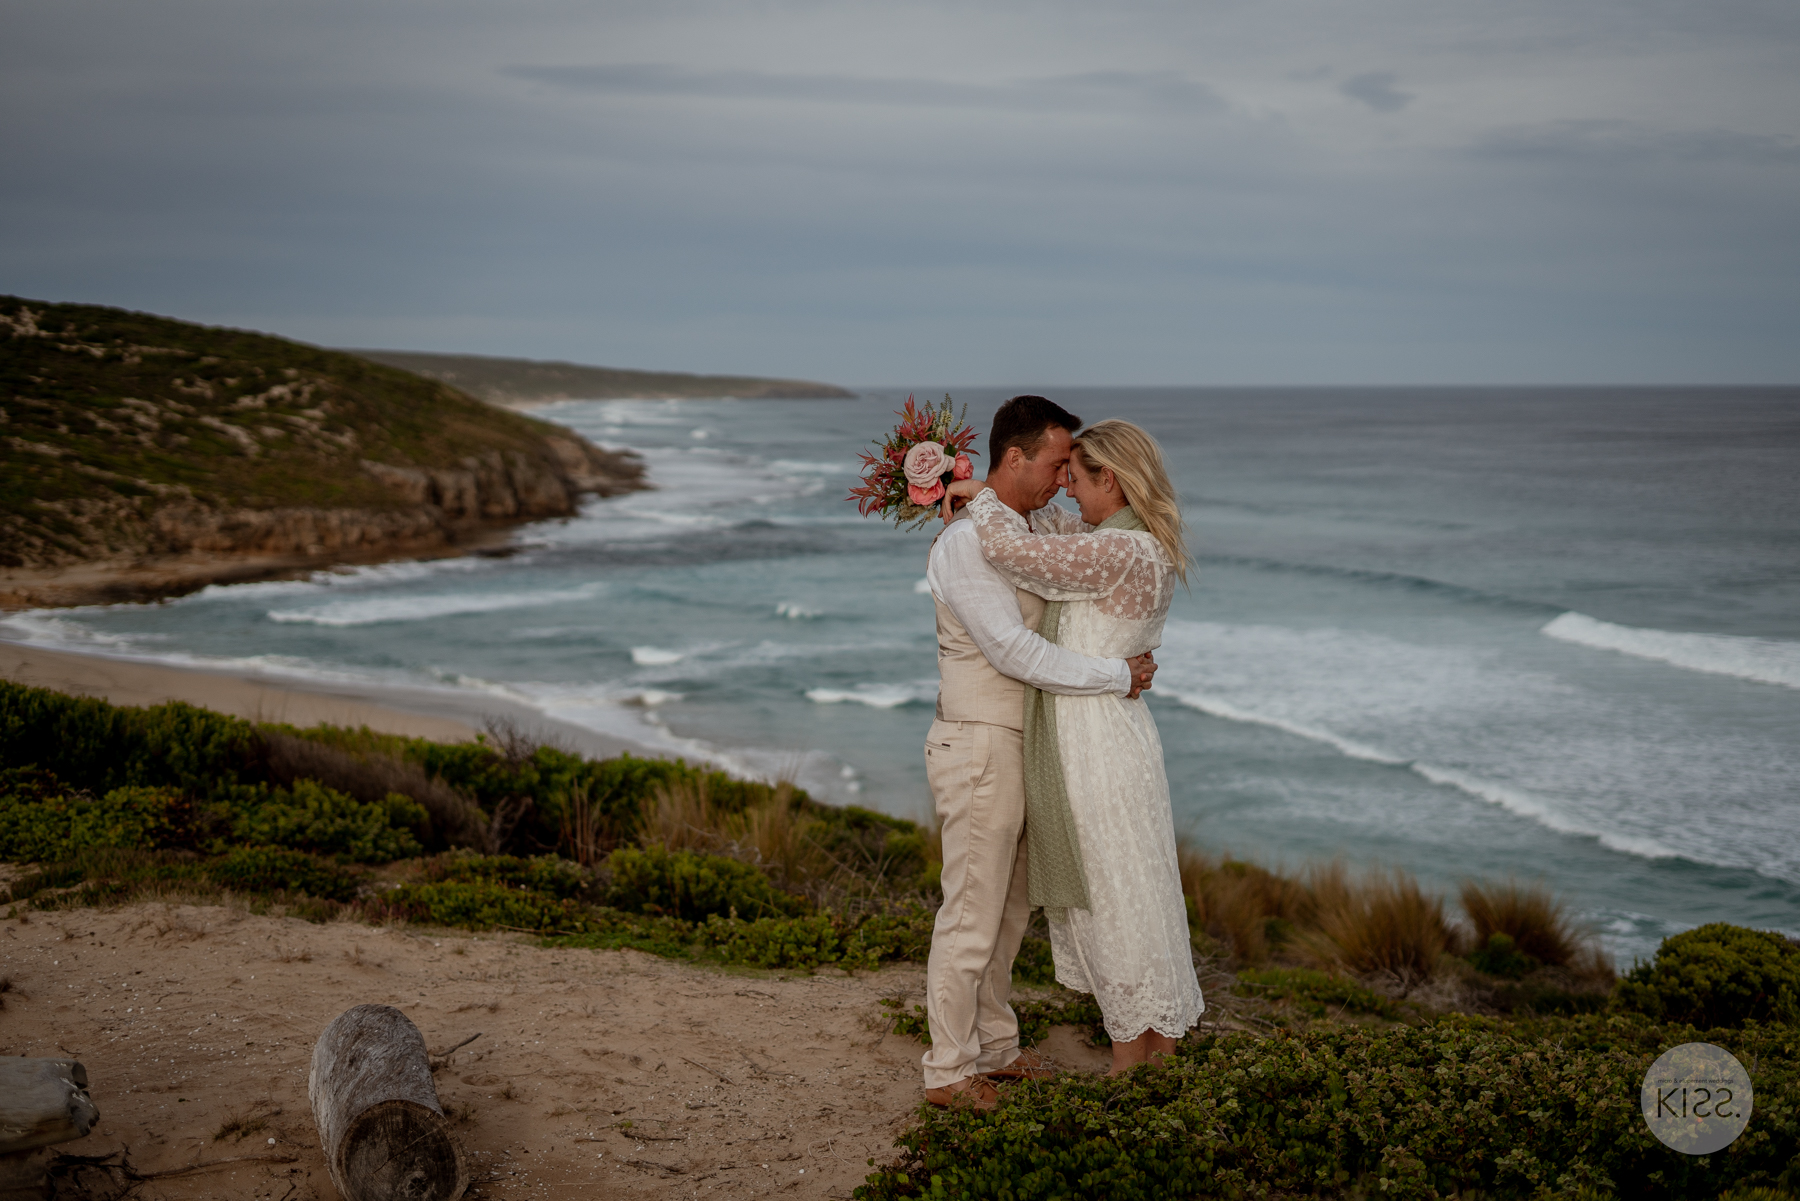 KISS Wedding Package - Simple and Sweet Elopement